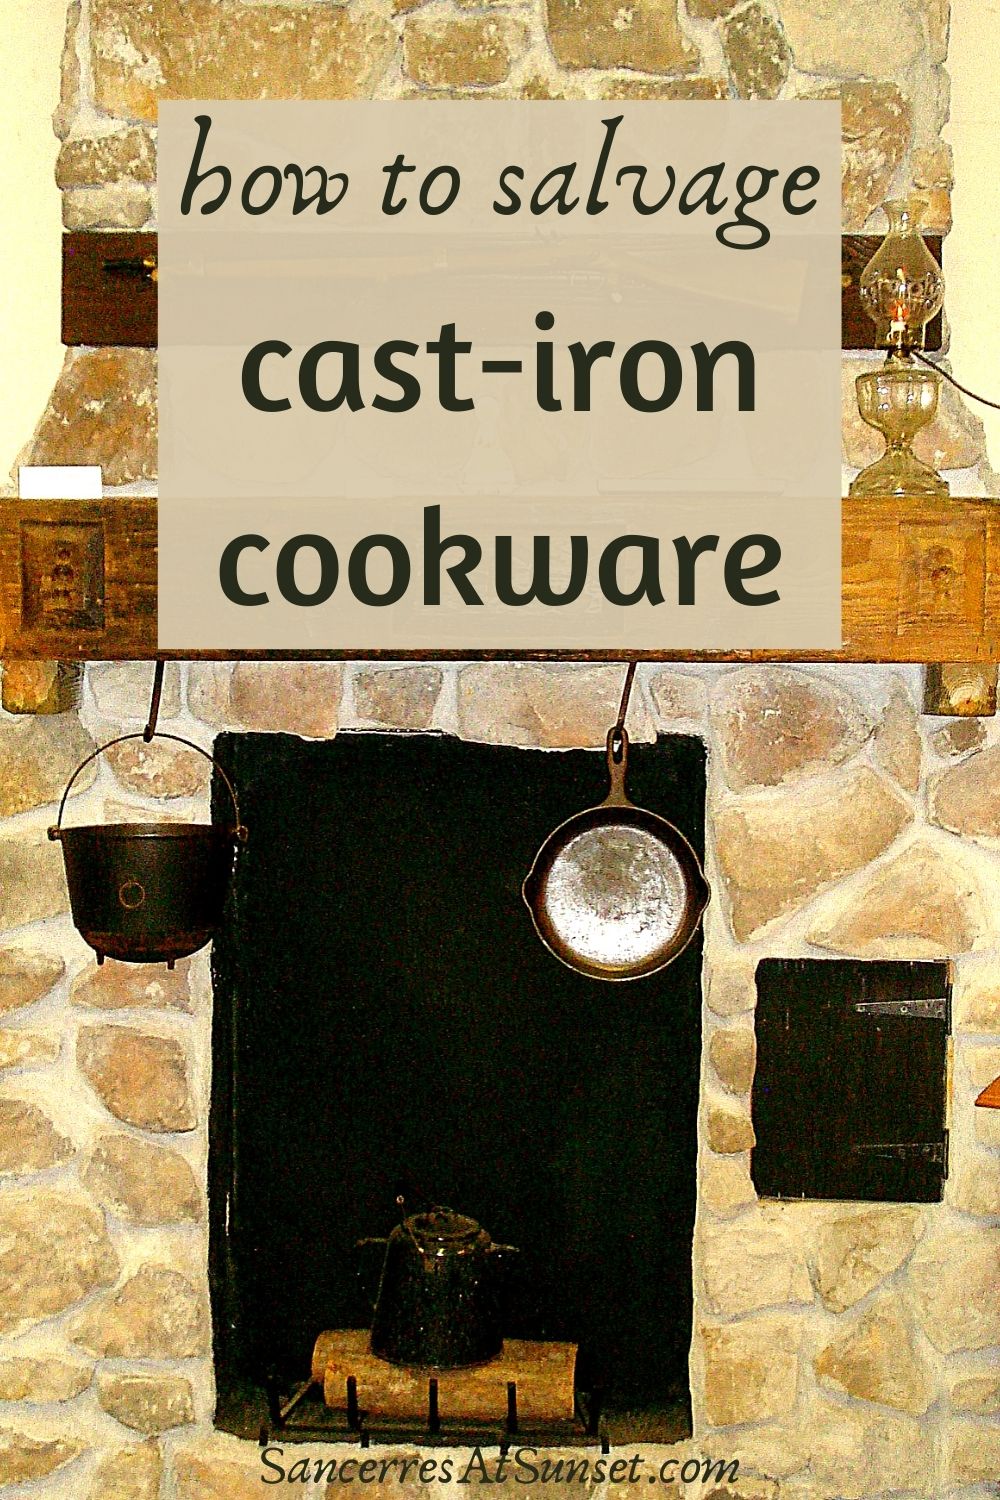 How to Salvage Cast Iron